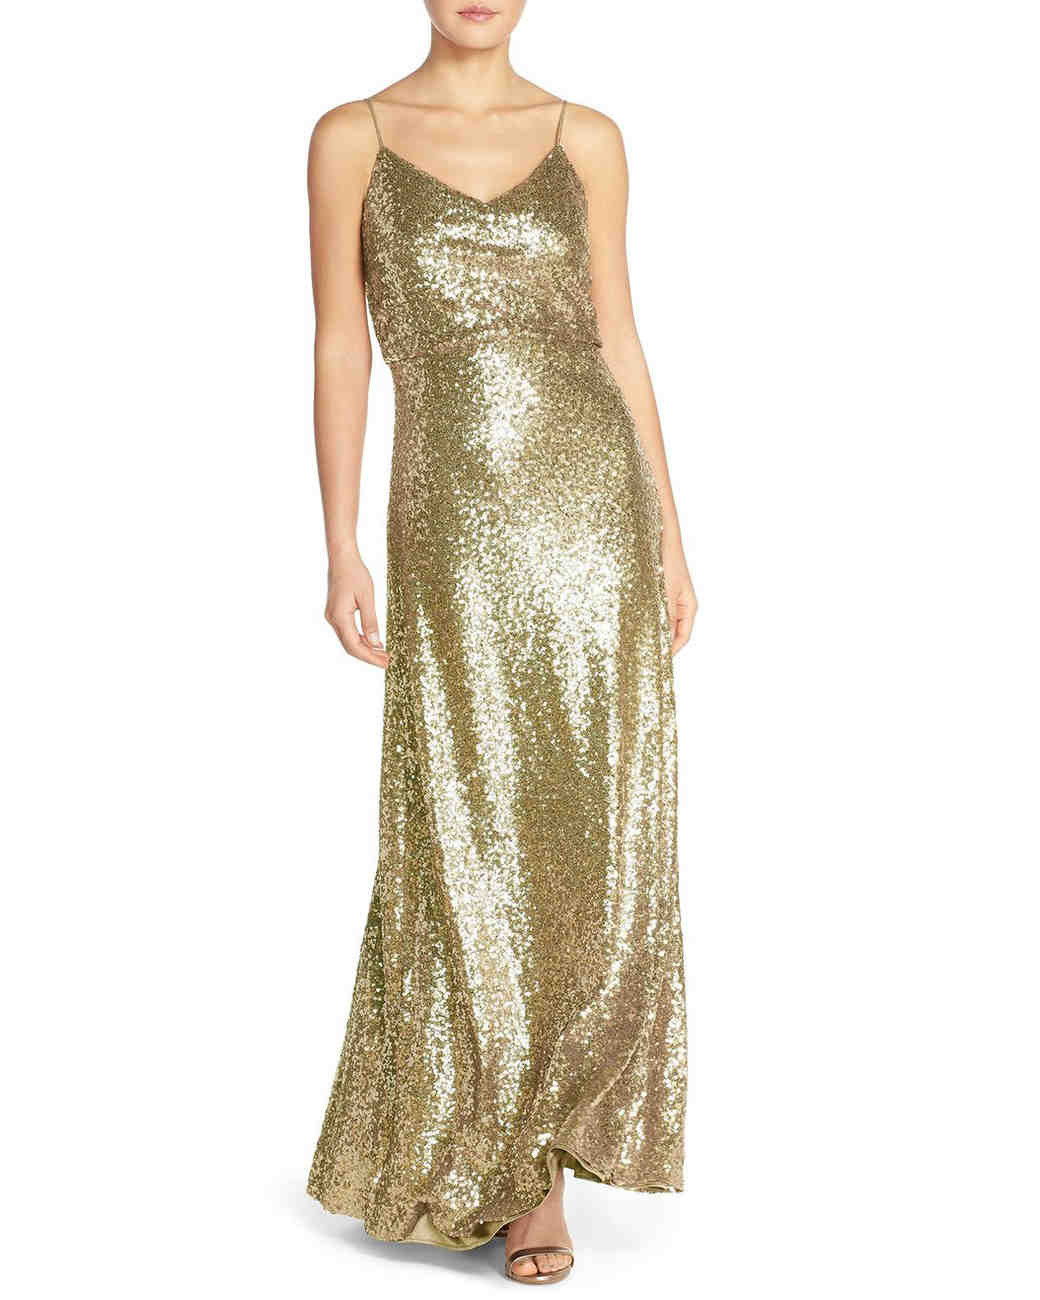 Metallic Bridesmaid Dresses That You Can Wear Over and Over Again ...